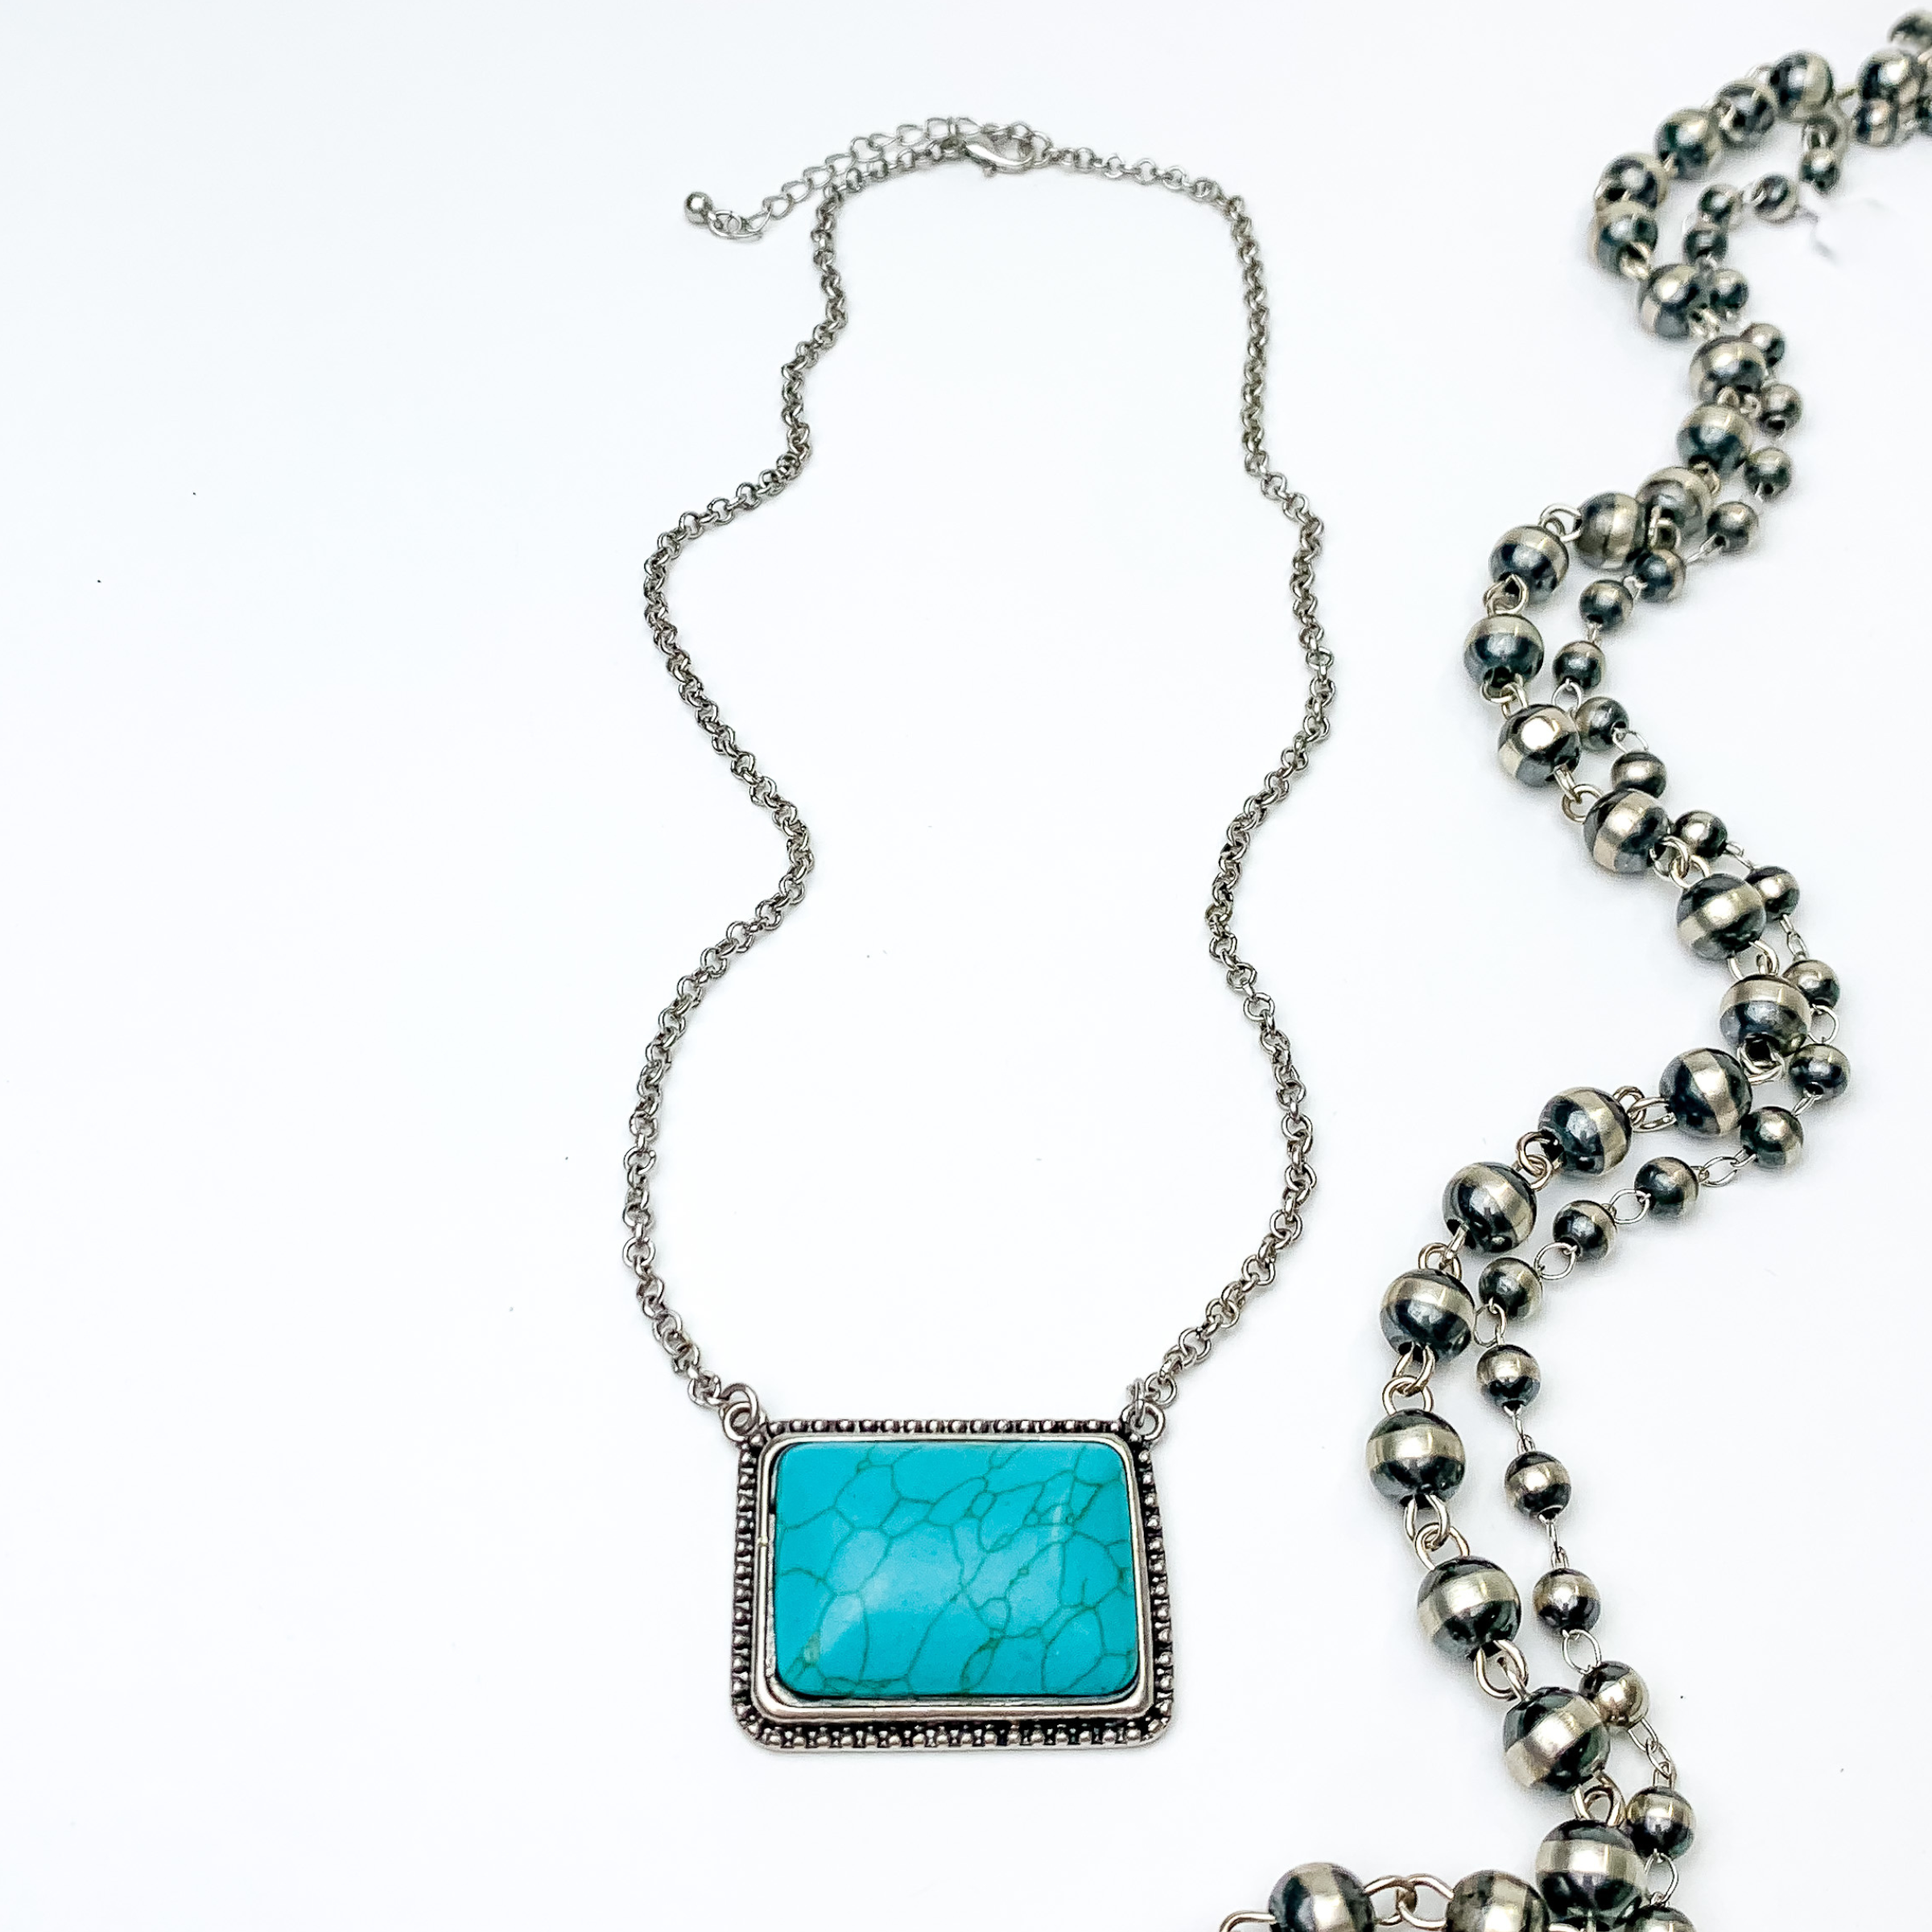 Silver chain necklace with a large, turquoise rectangle pendant with a silver outline. This necklace is pictured on a white background with silver beads on the right side.